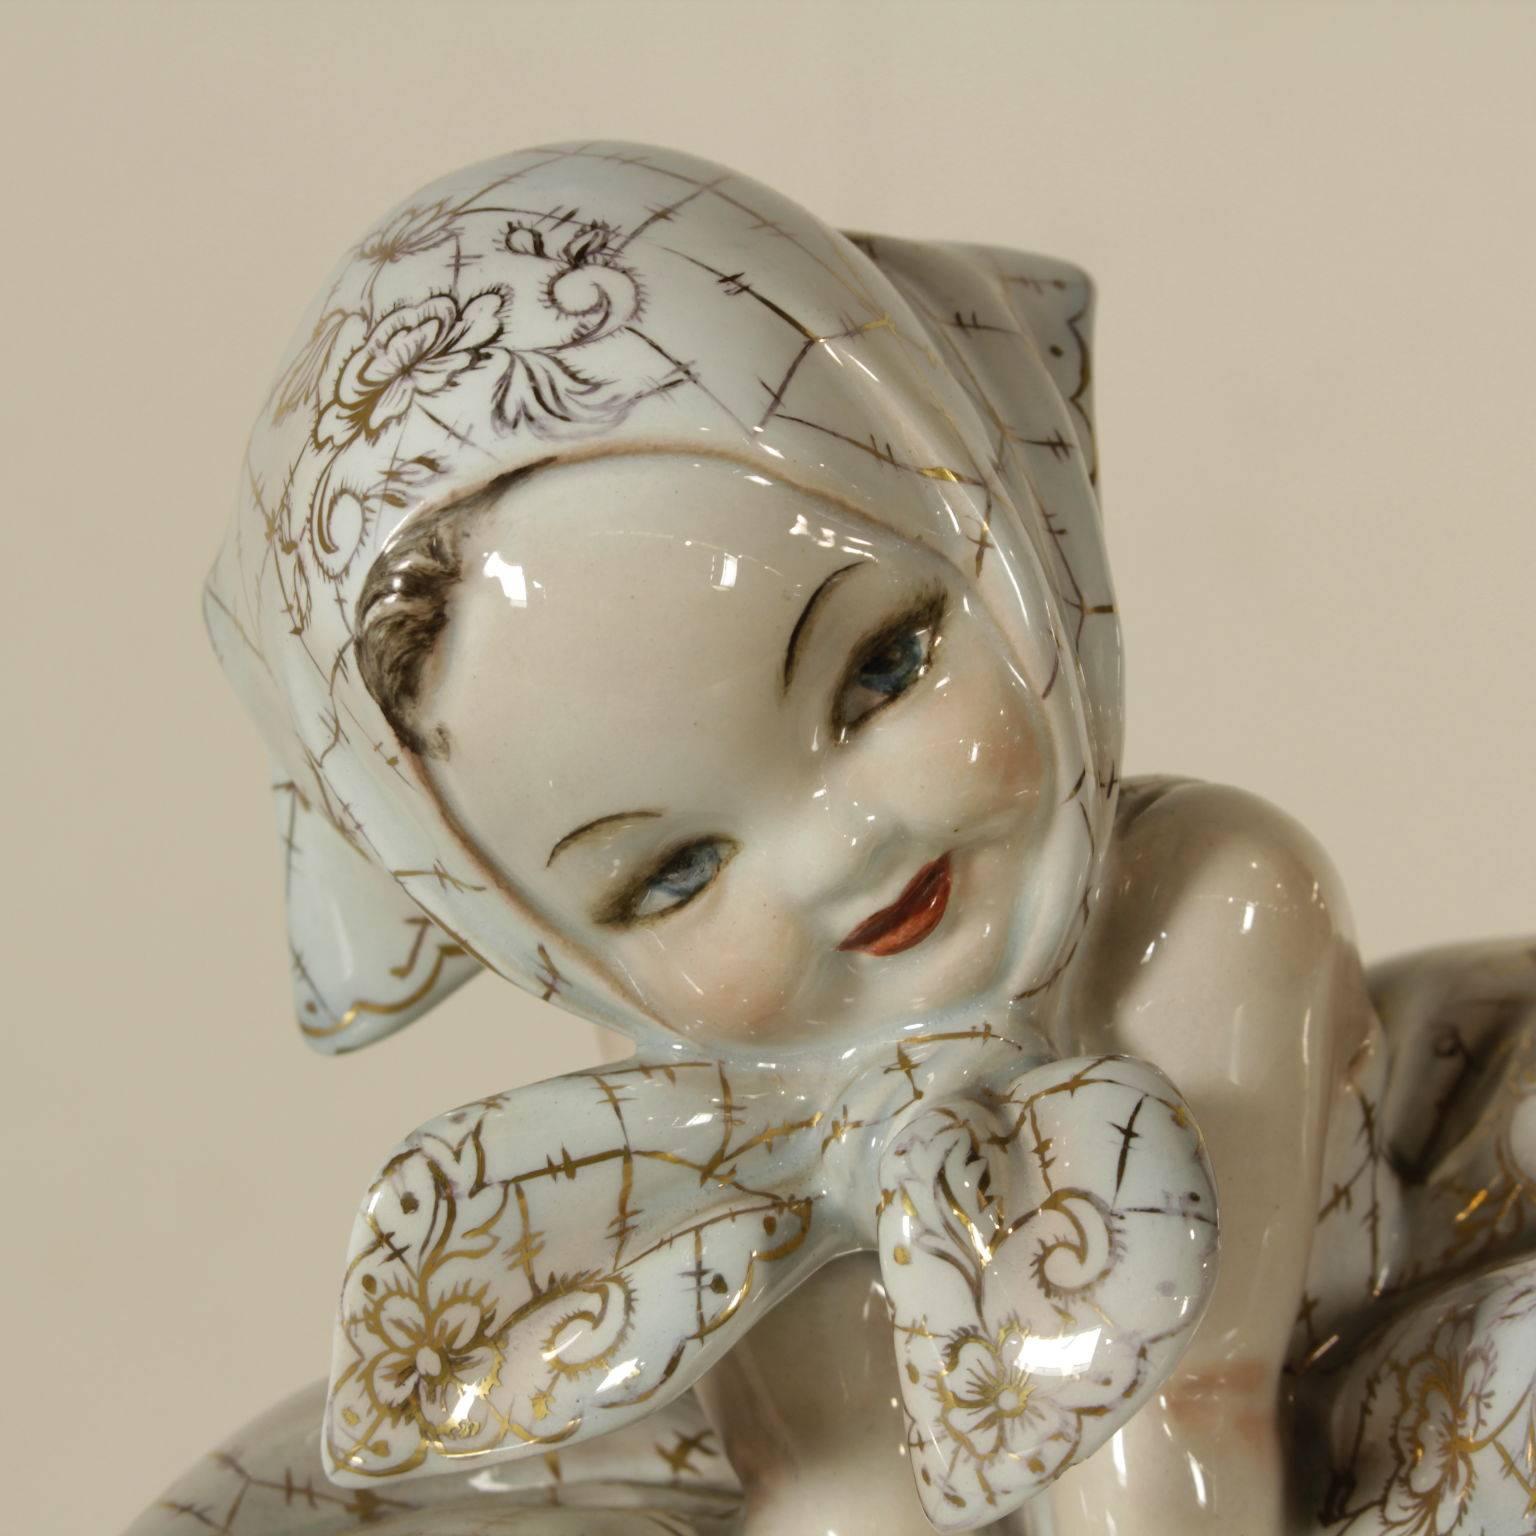 An enamelled ceramic sculpture designed and signed by Guido Cacciapuoti. Signature on the base. Manufactured in Italy, 1930s-1940s.